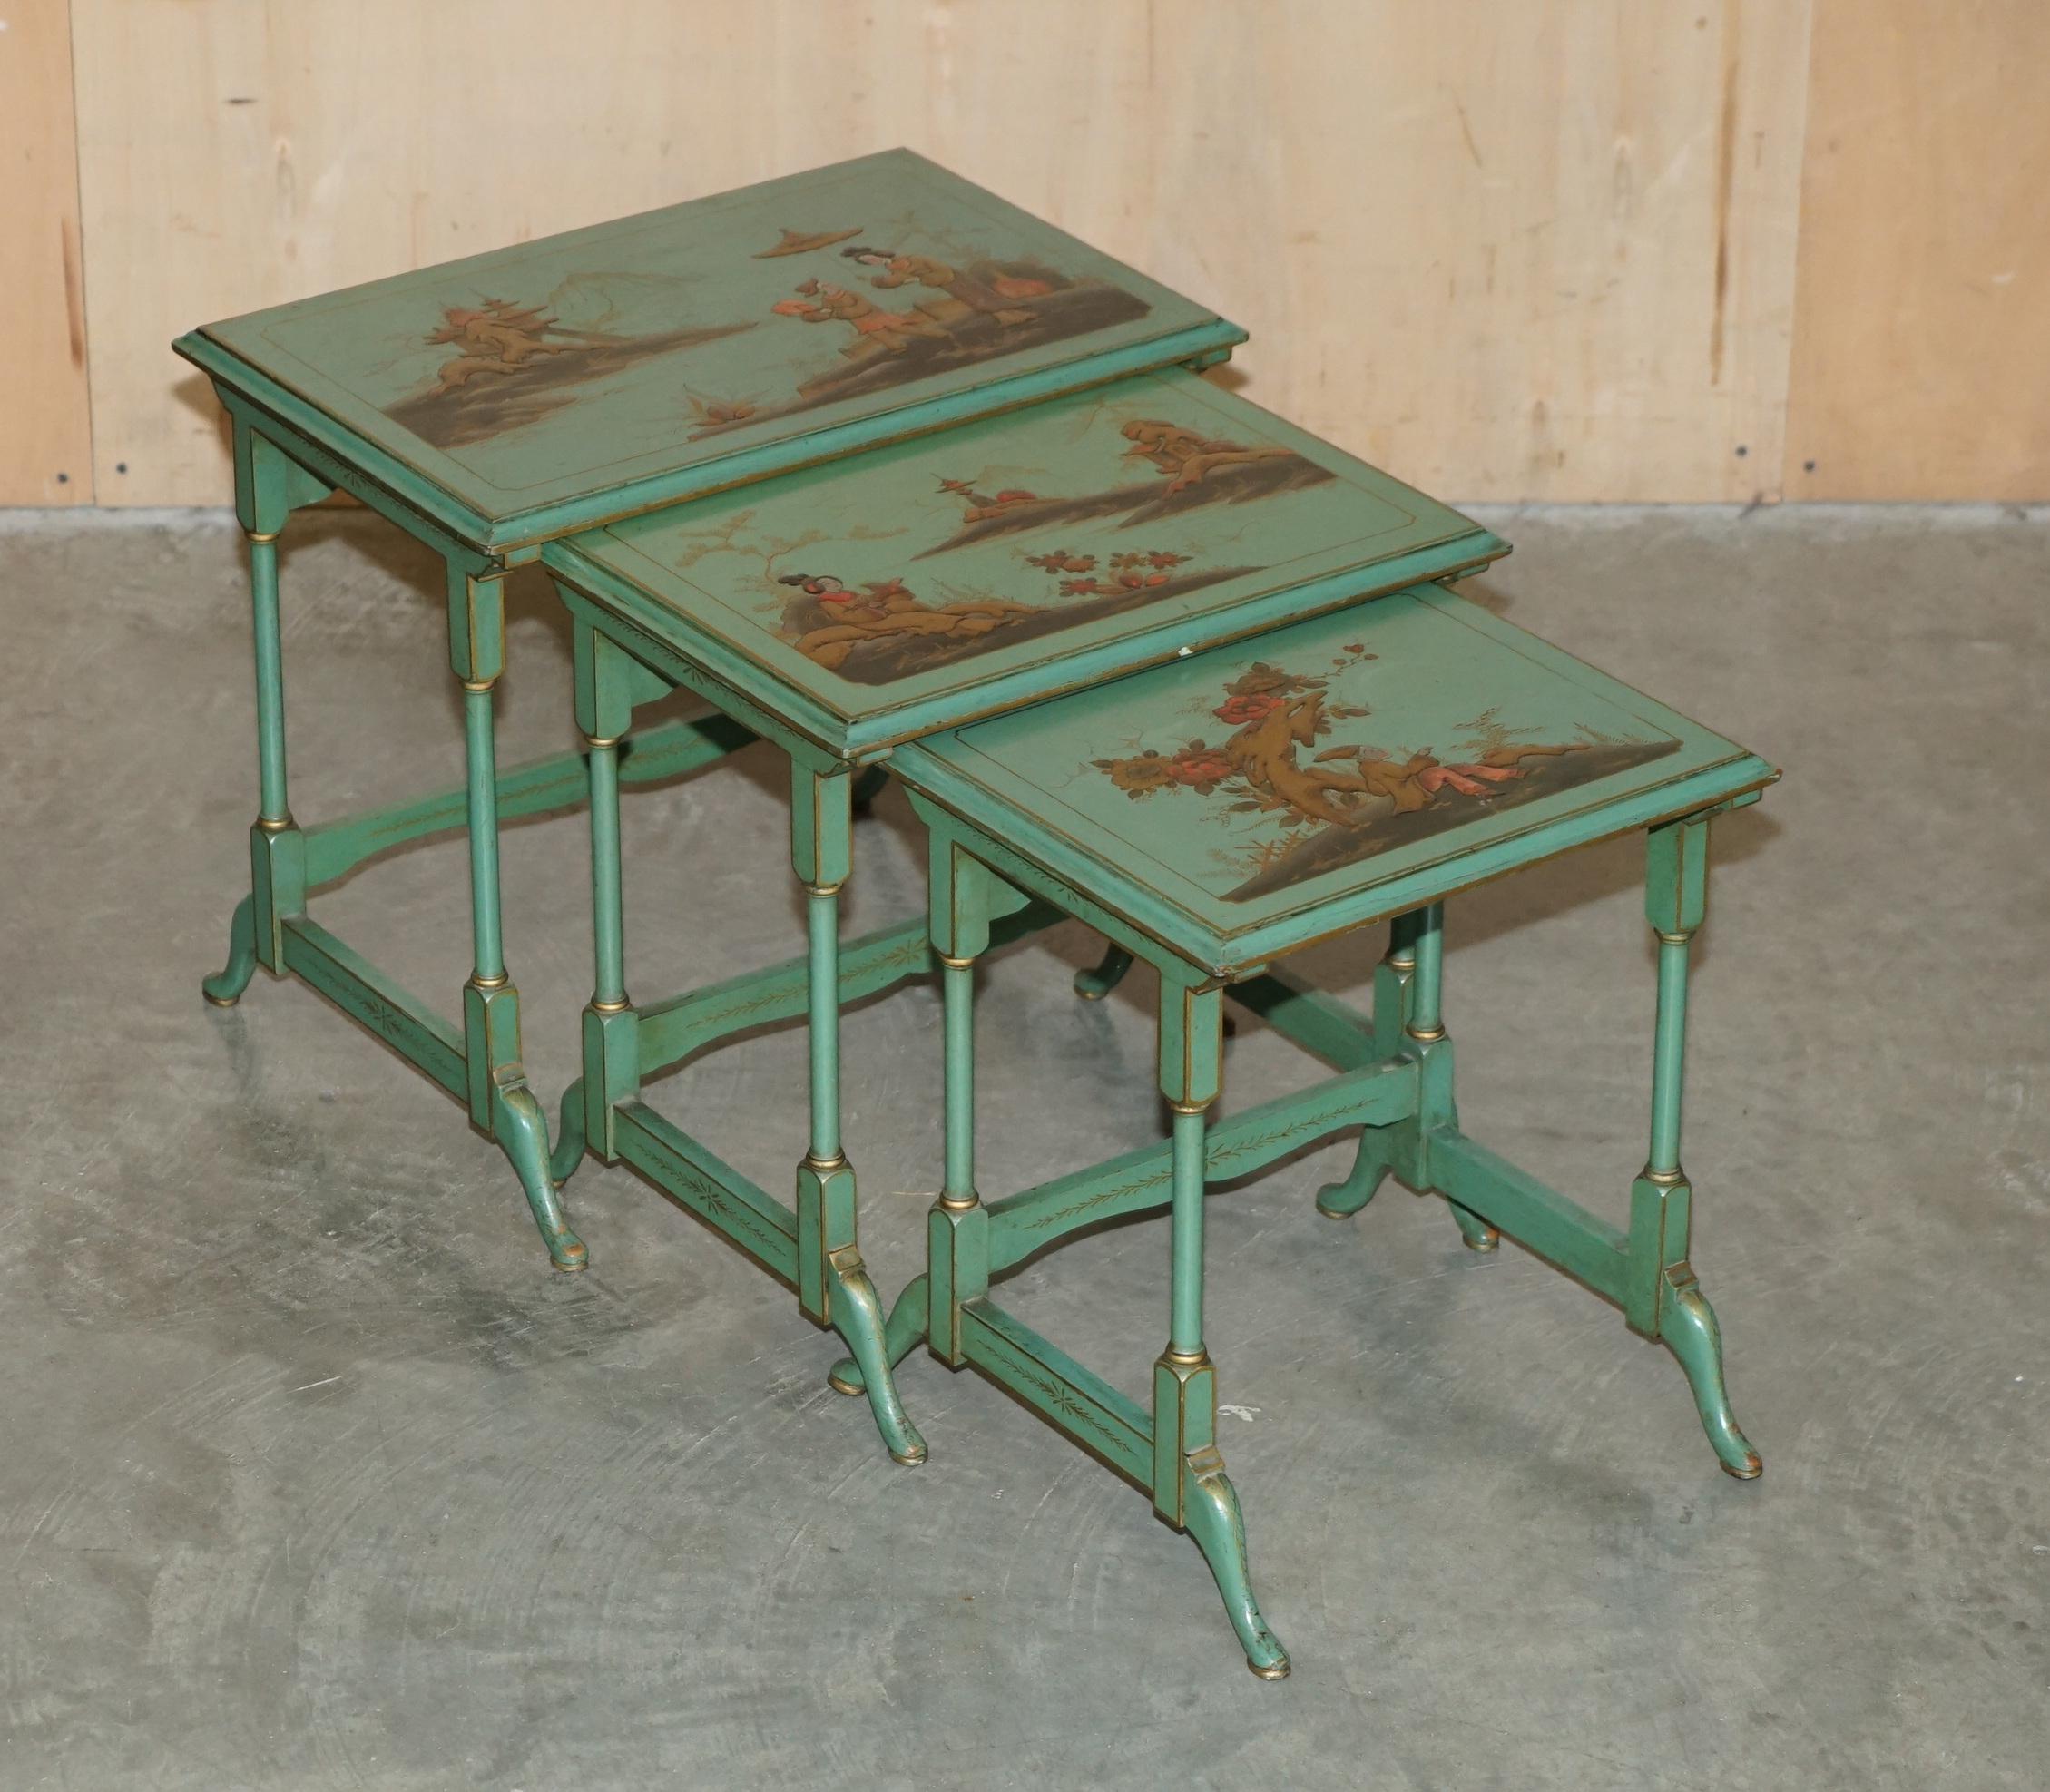 Royal House Antiques

Royal House Antiques is delighted to offer for sale this lovely nest of three original Chinese Chinoiserie green lacquered and hand painted nested tables

Please note the delivery fee listed is just a guide, it covers within